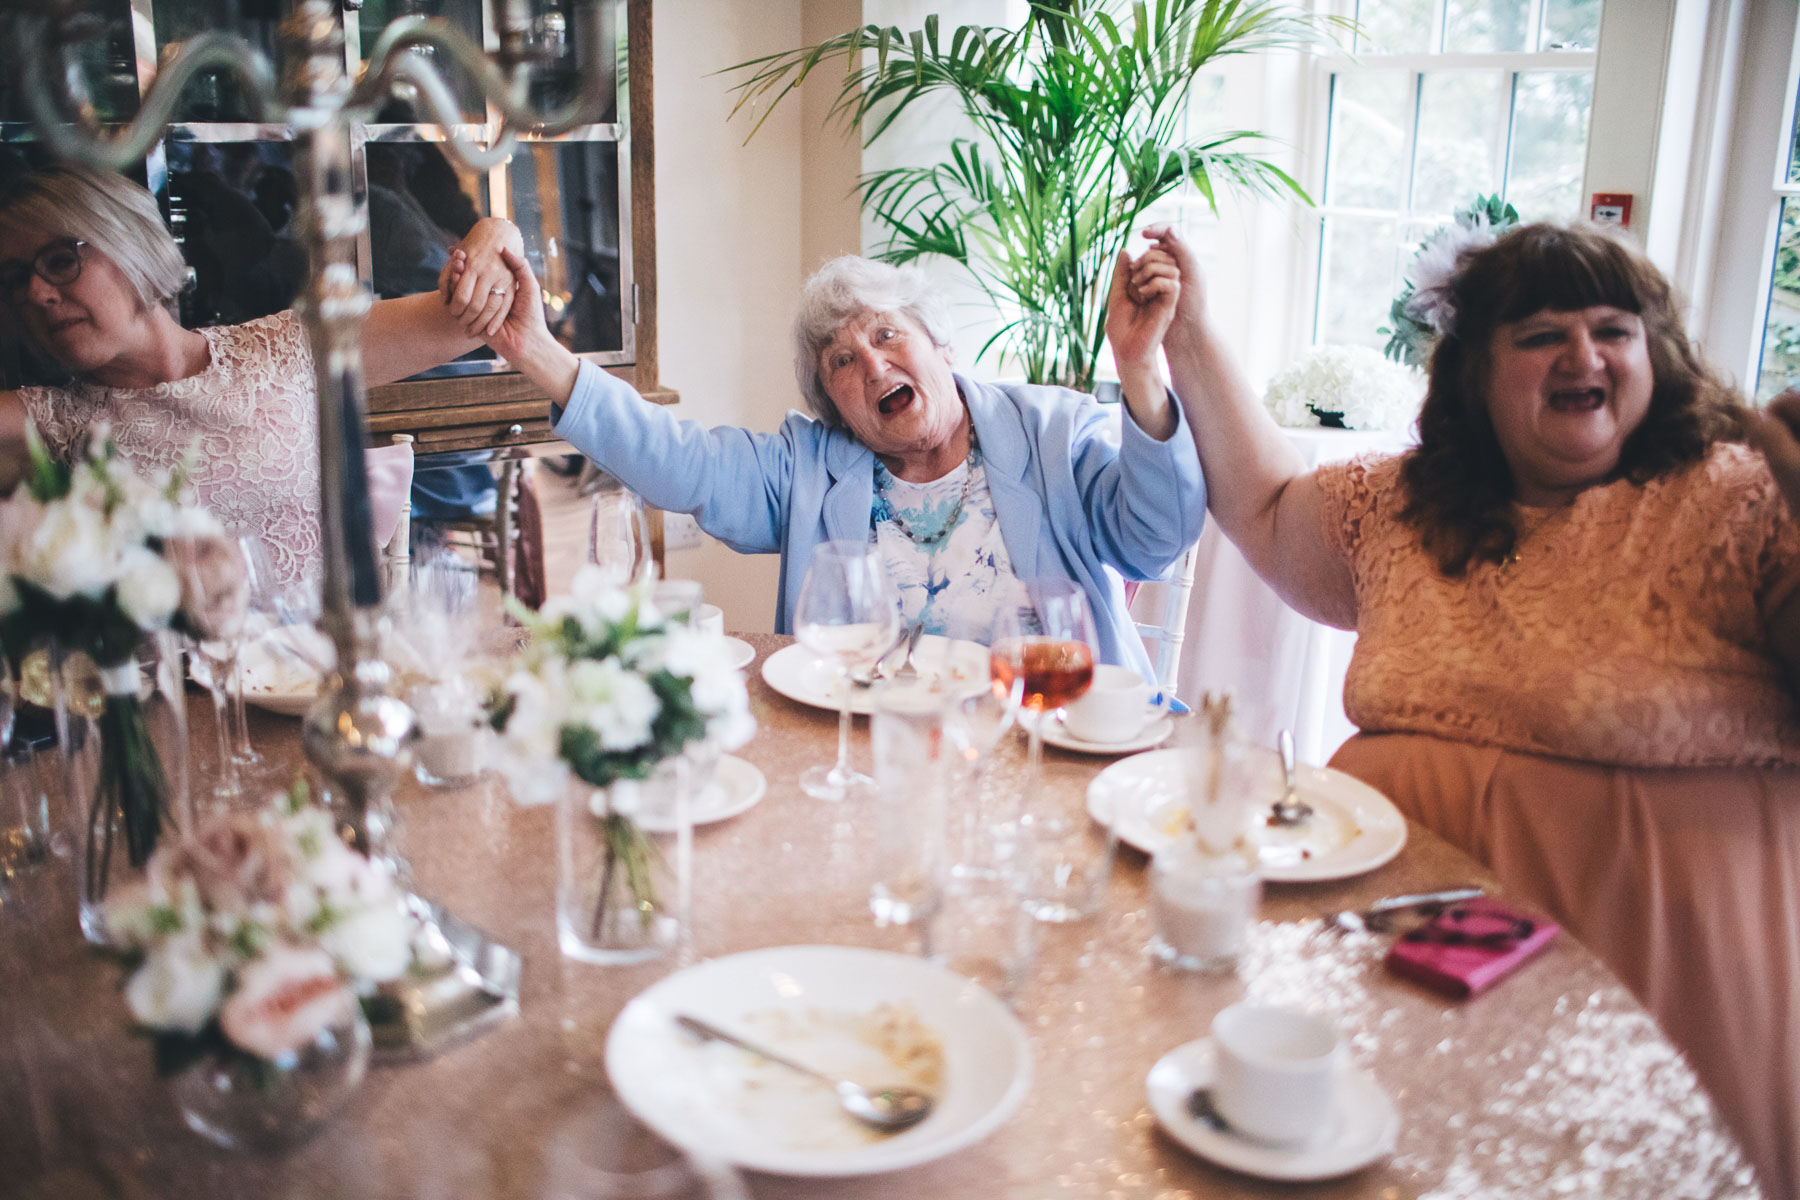 grandma holding hands up singing along during the wedding breakfast